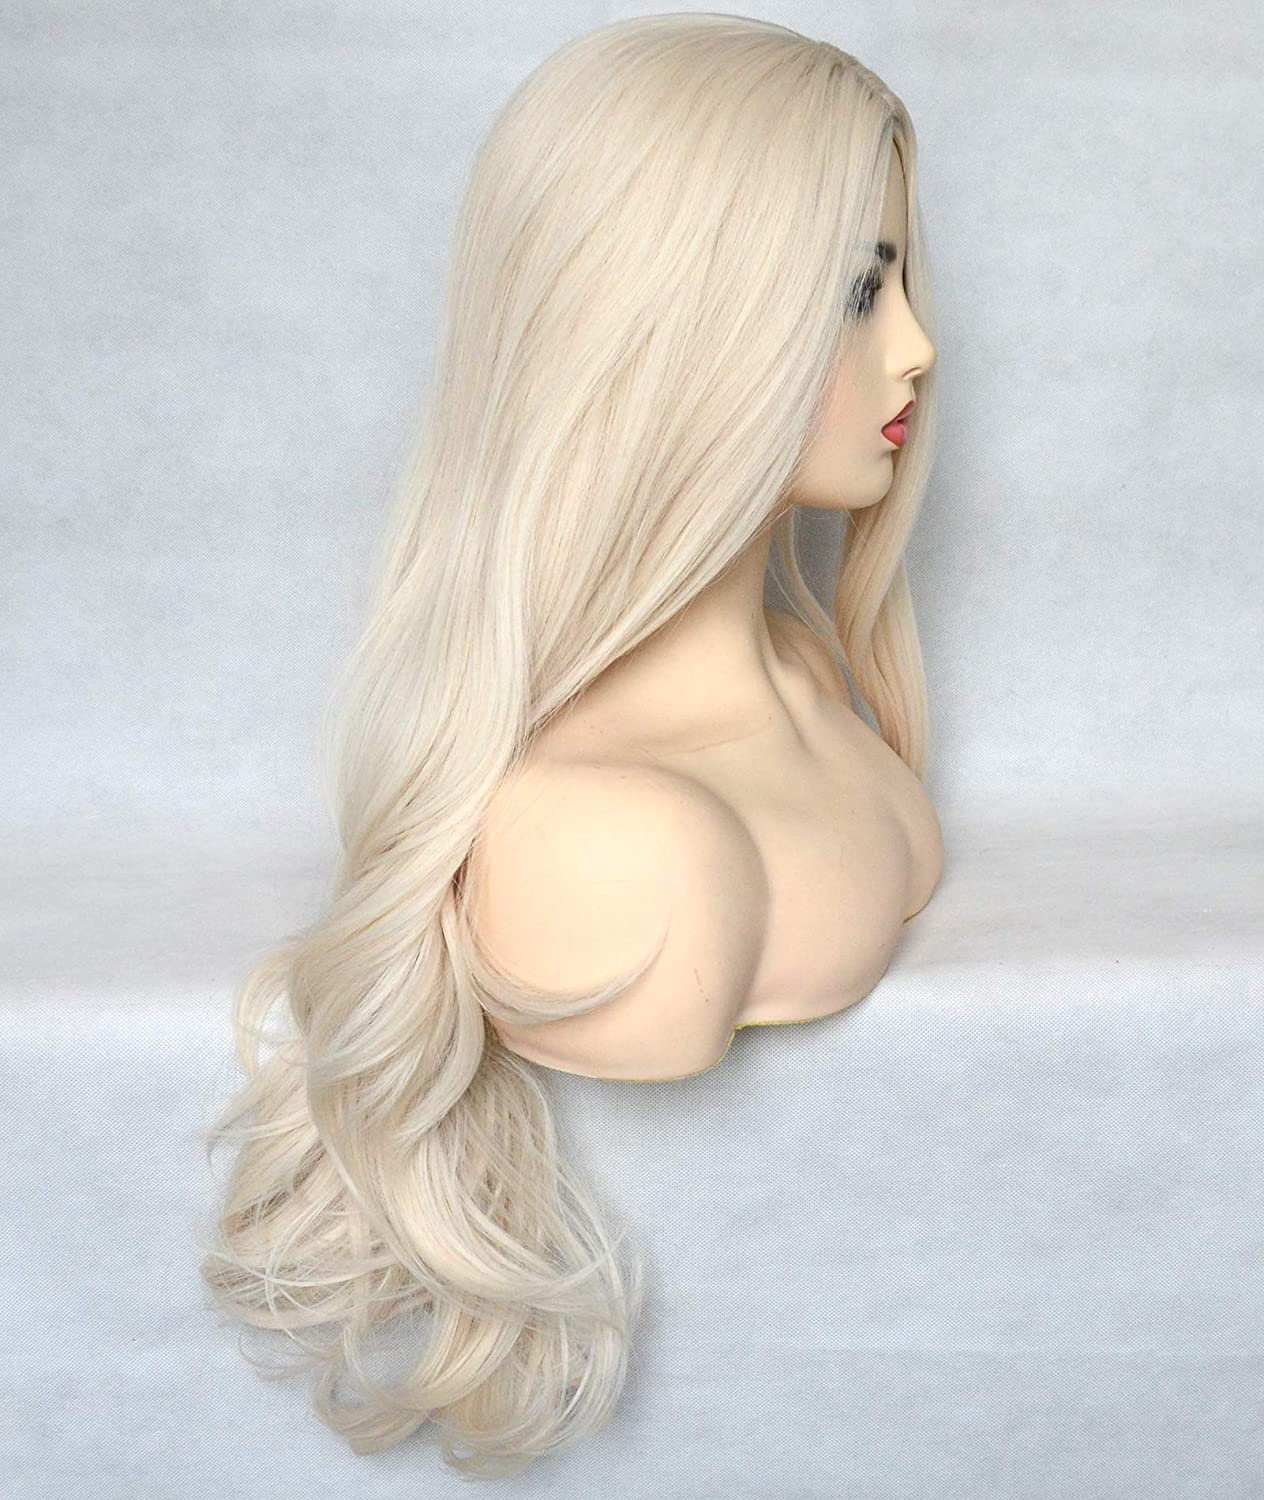 Platinum Blonde 60# Synthetic Wig 22 Inch (No Lace Wig)